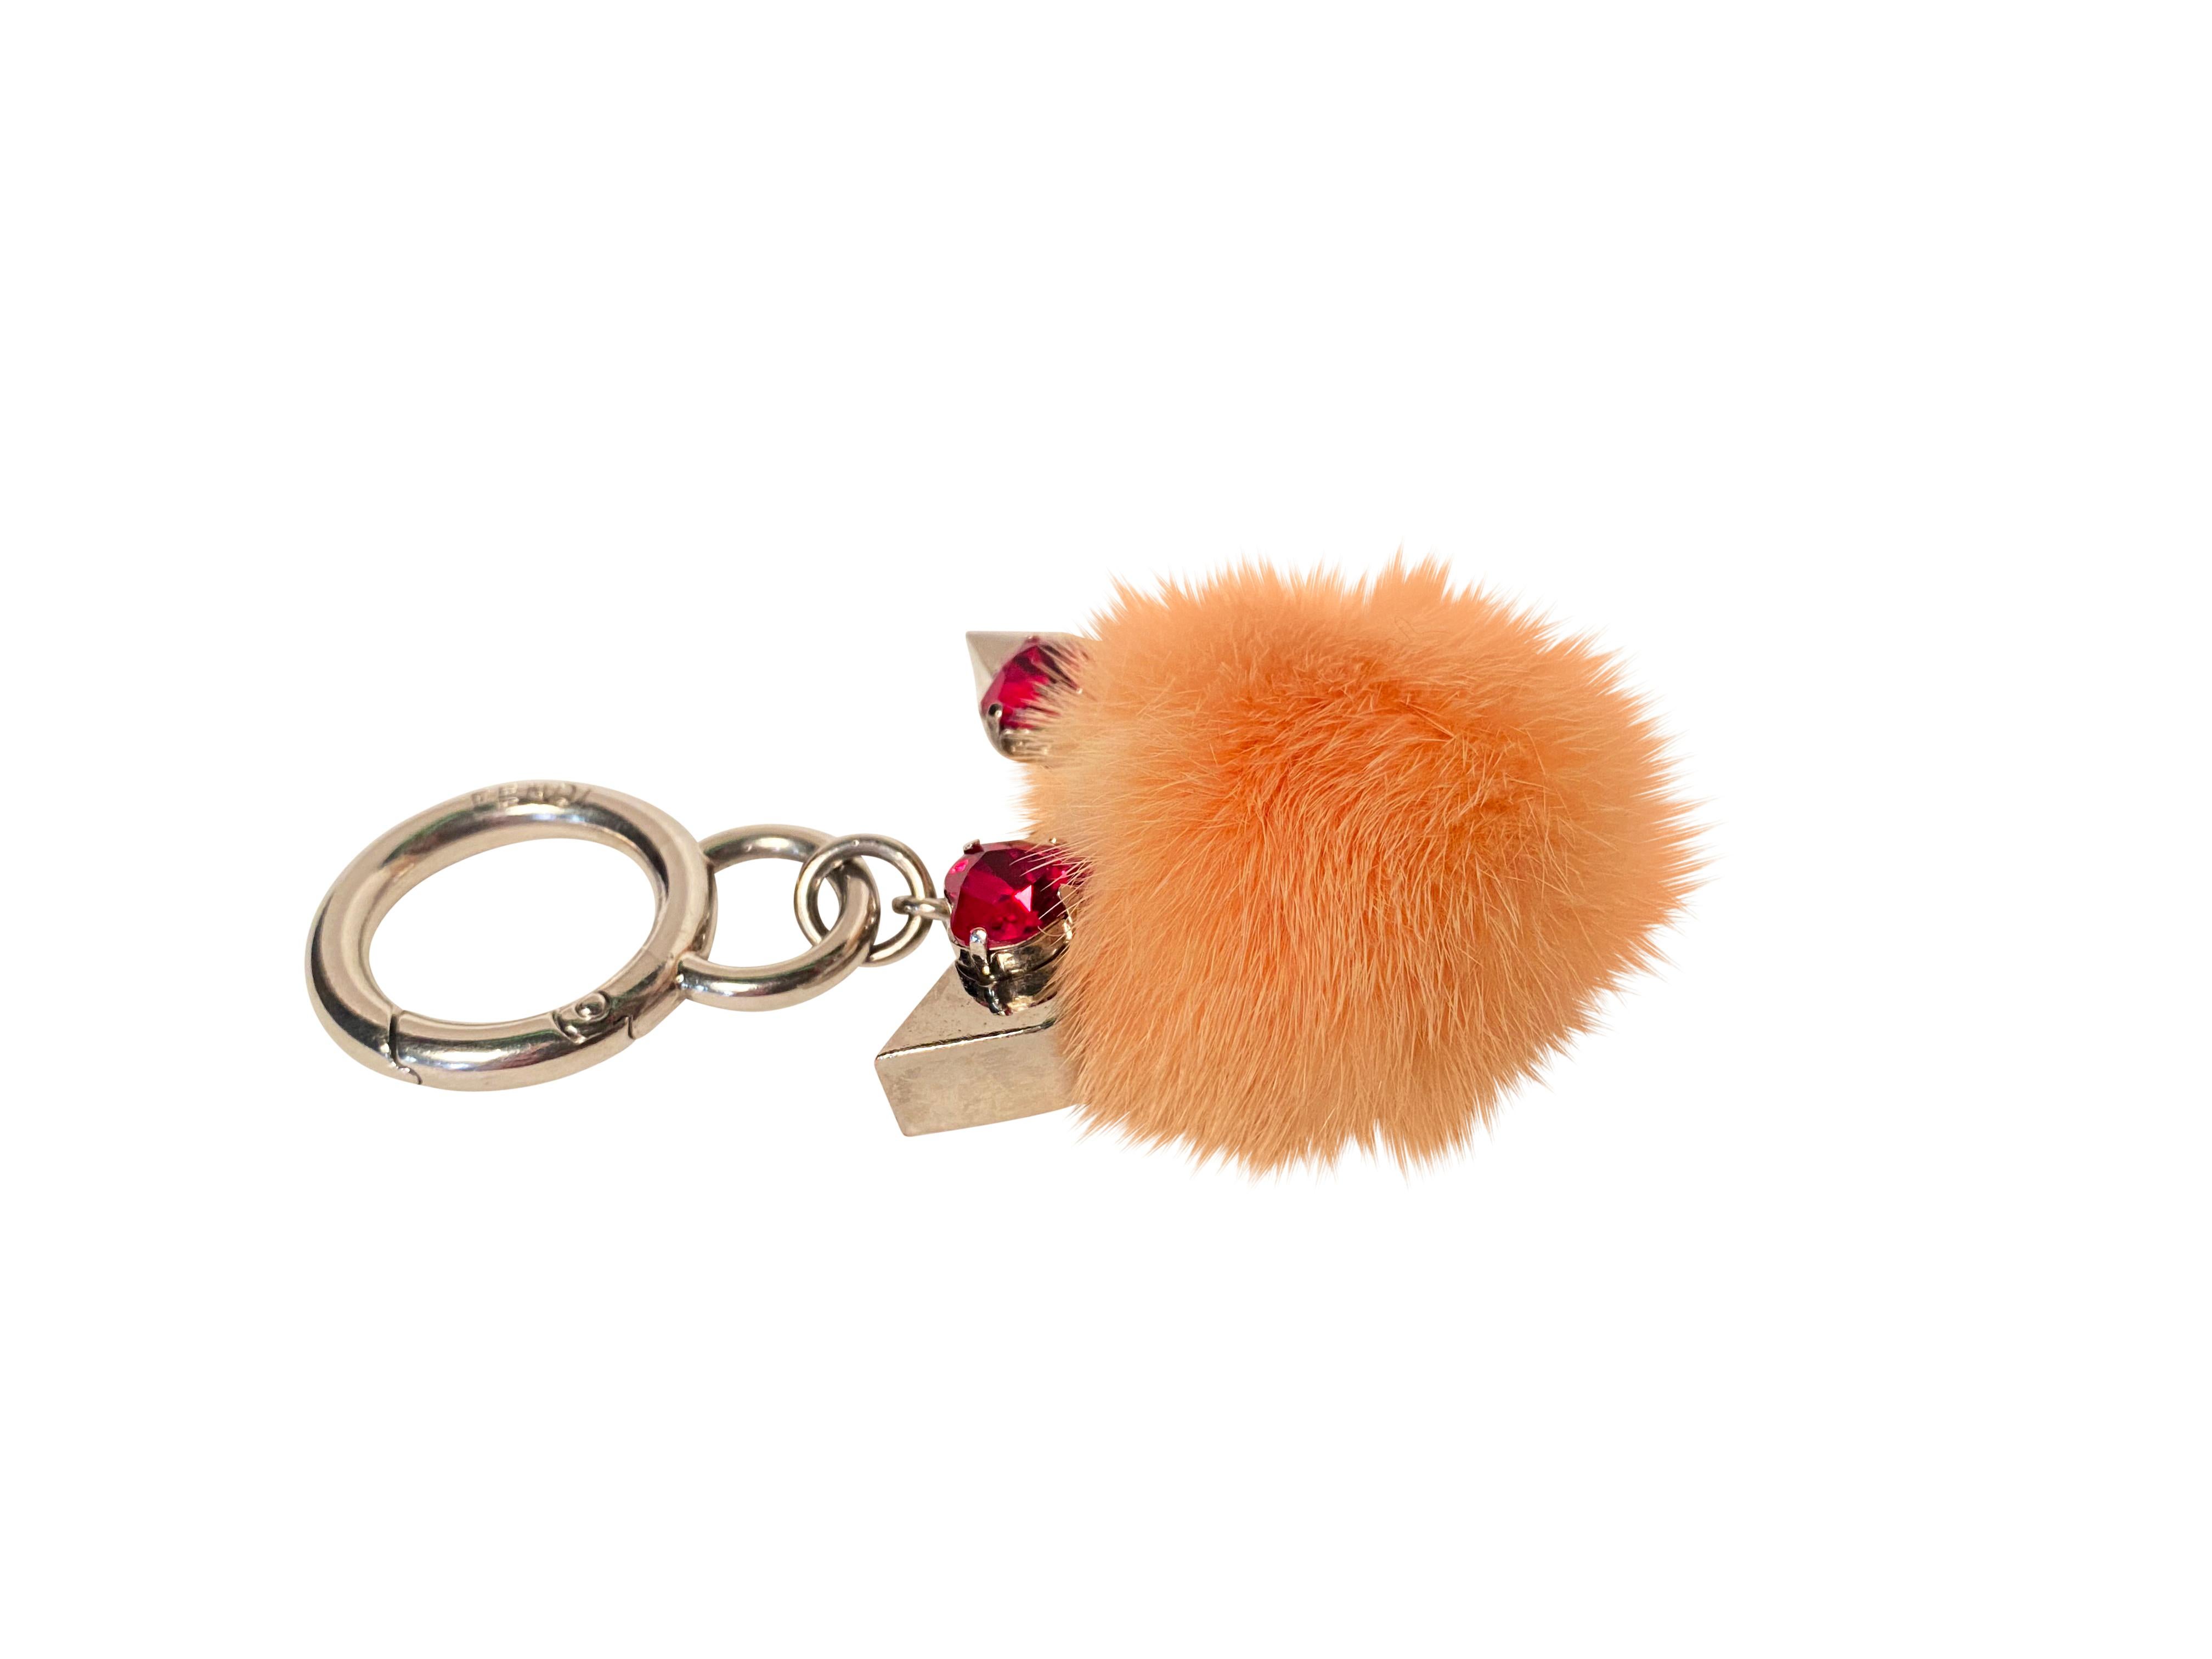 Fendi Mini Monster Eyes key and bag charm in gorgeous soft peach coloured mink fur with silver-toned hardware, red diamante eyes and spring clip closure.

Made in Italy.